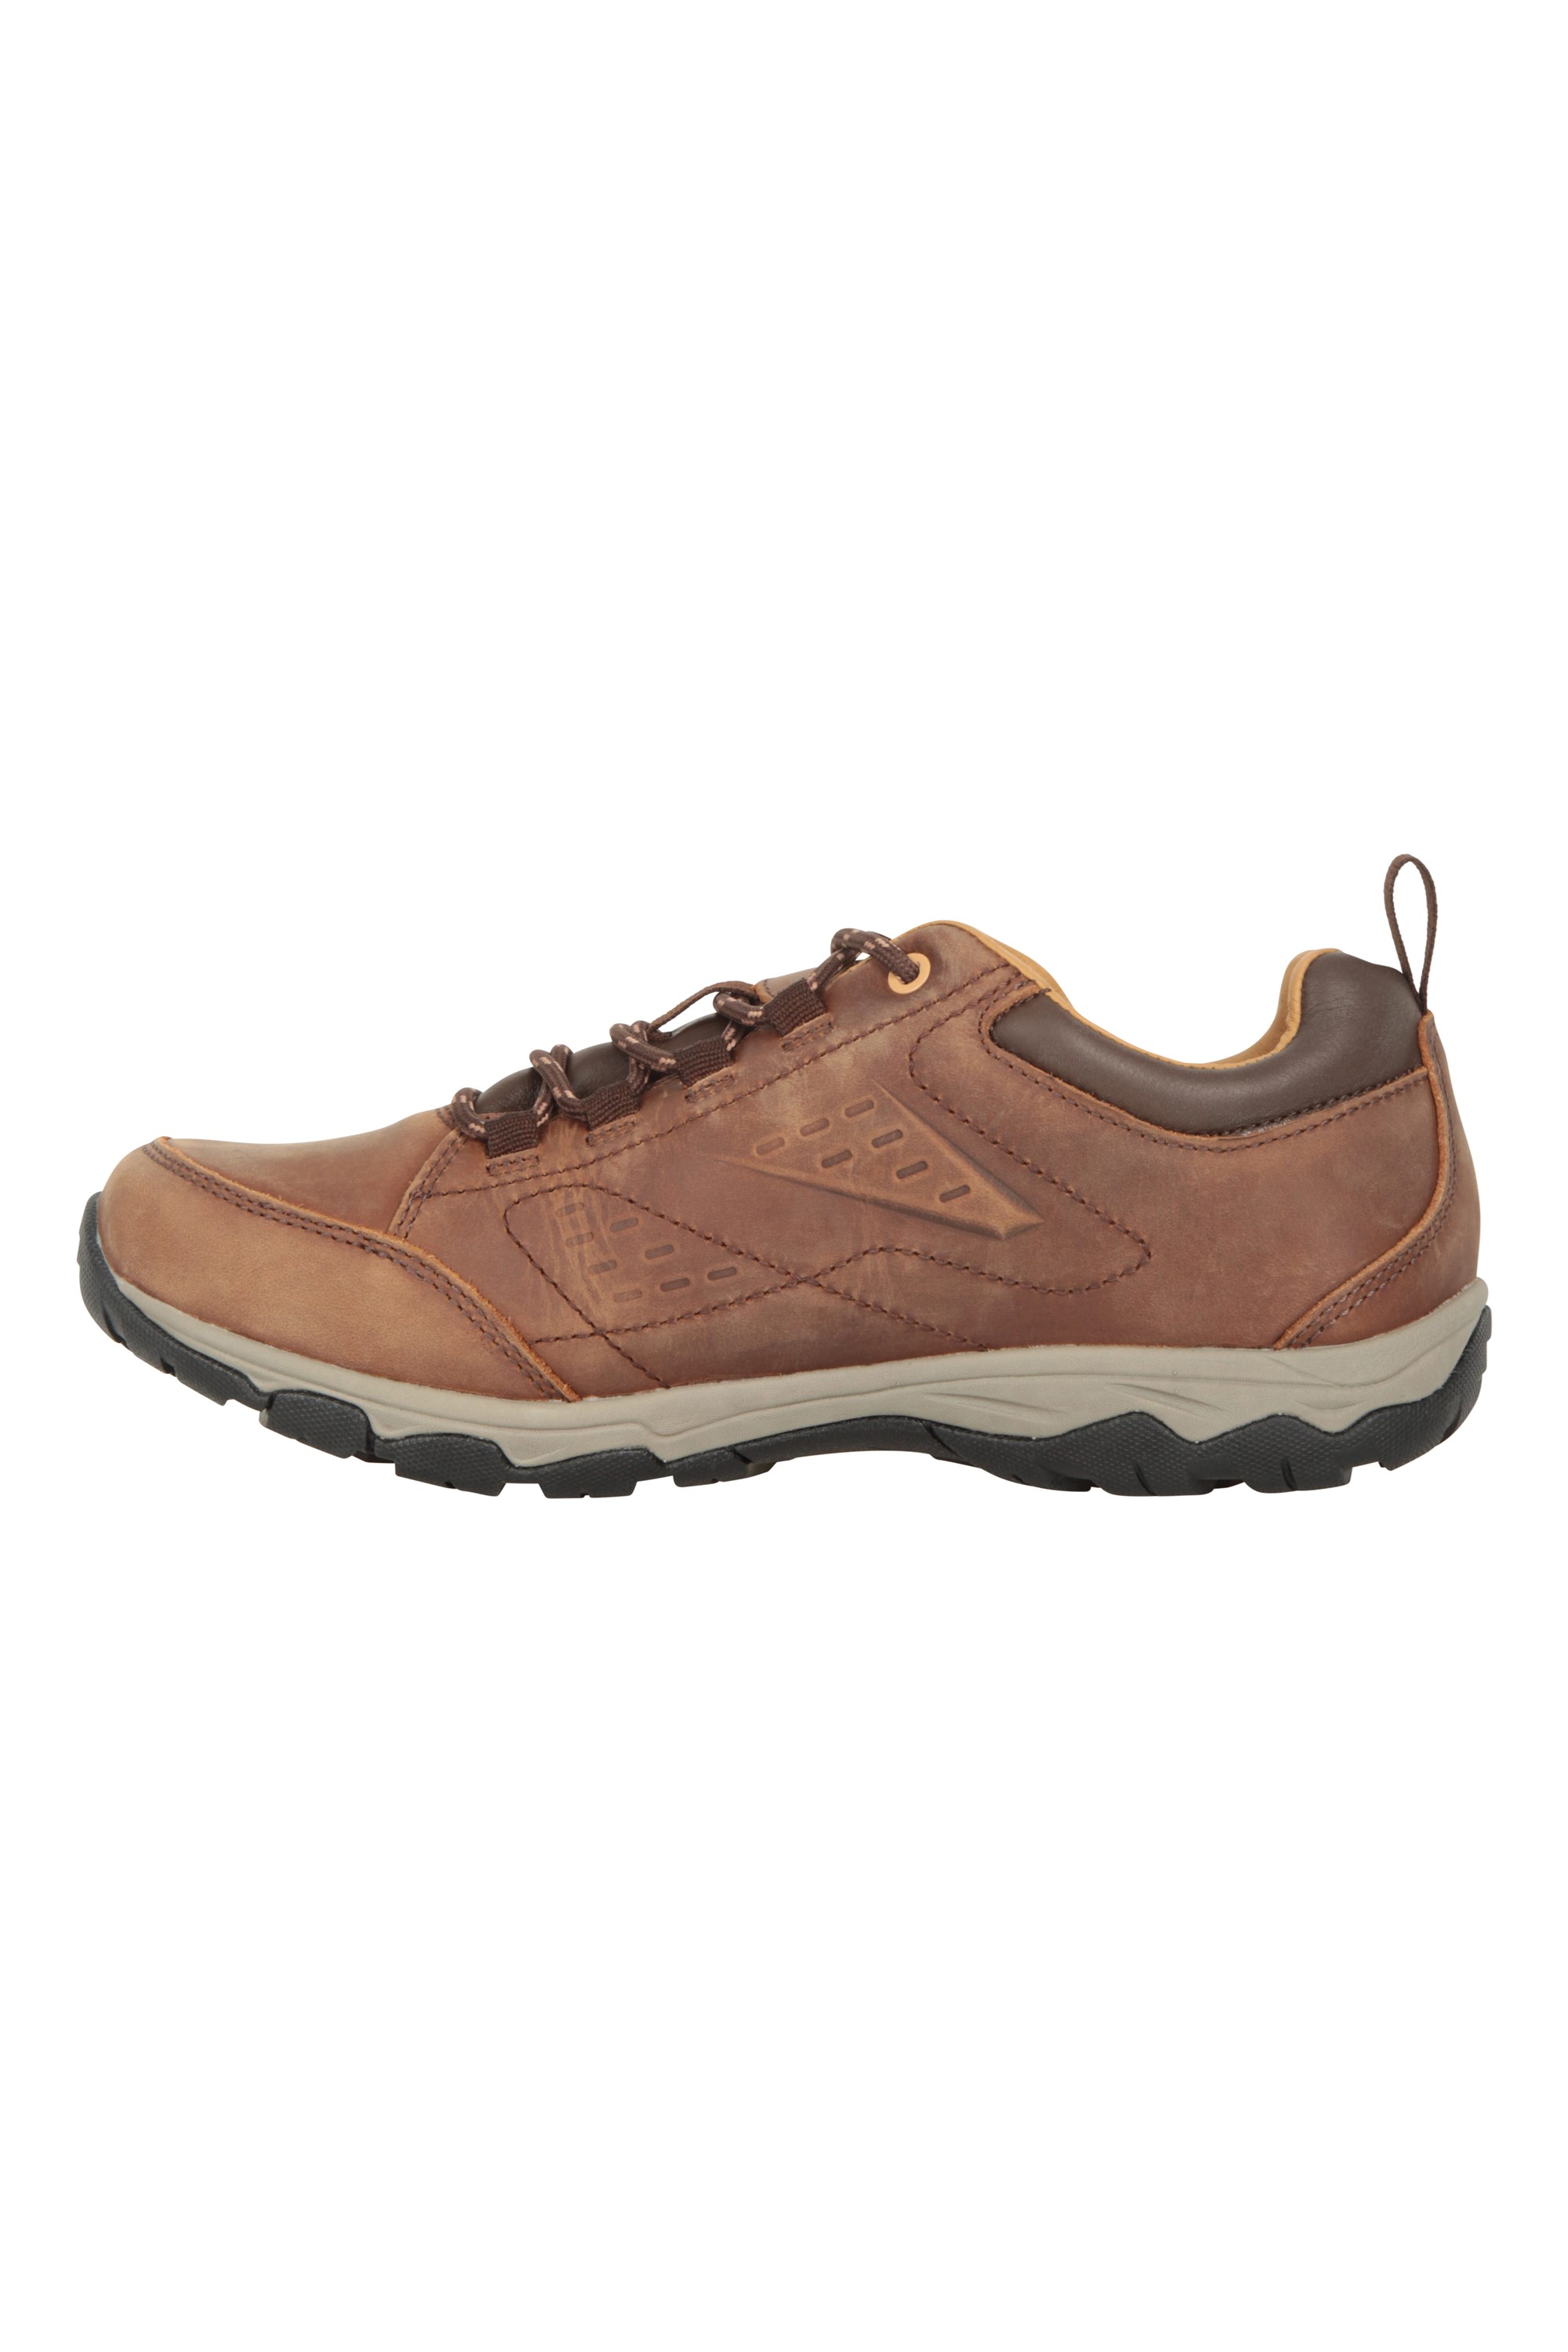 Extreme Pioneer Womens Hiking Shoes